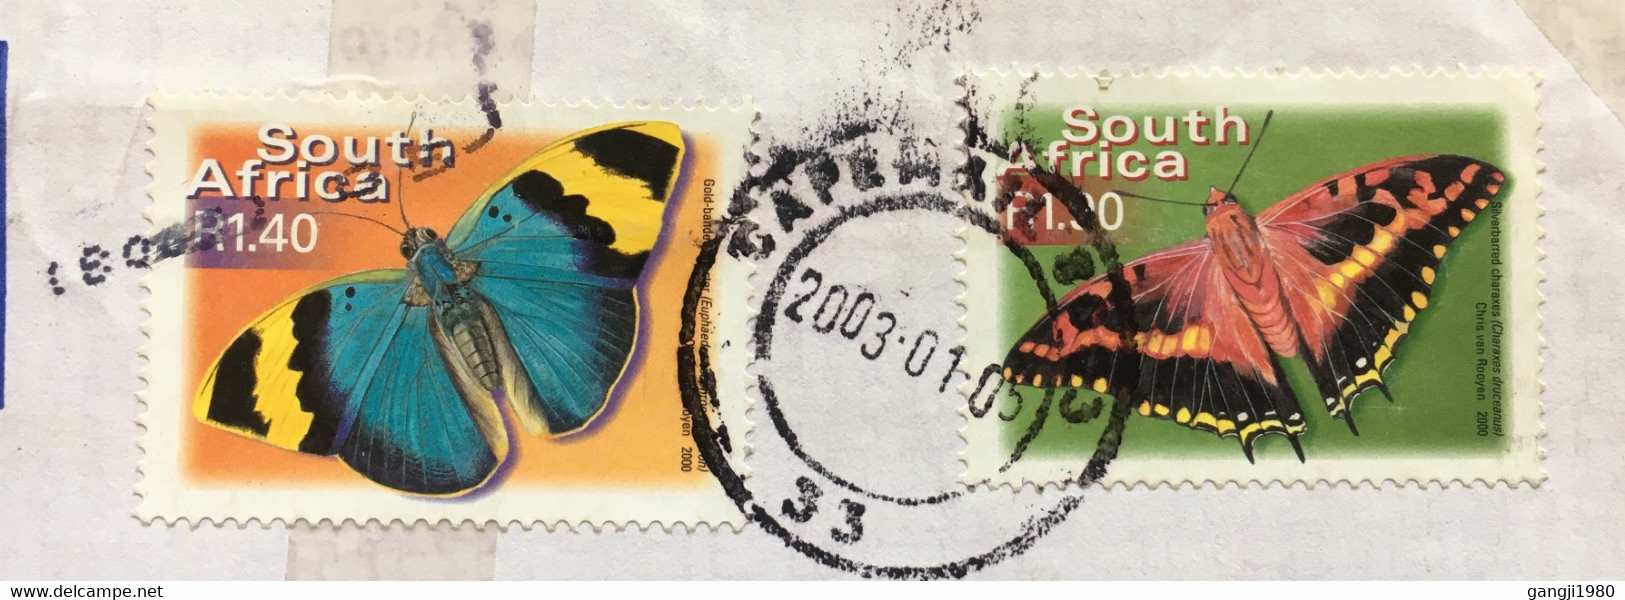 SOUTH AFRICA 2003, AIRMAIL COVER 2 DIFFERENT BUTTERFLY STAMPS ,CAPETOWN CITY TO INDIA - Covers & Documents